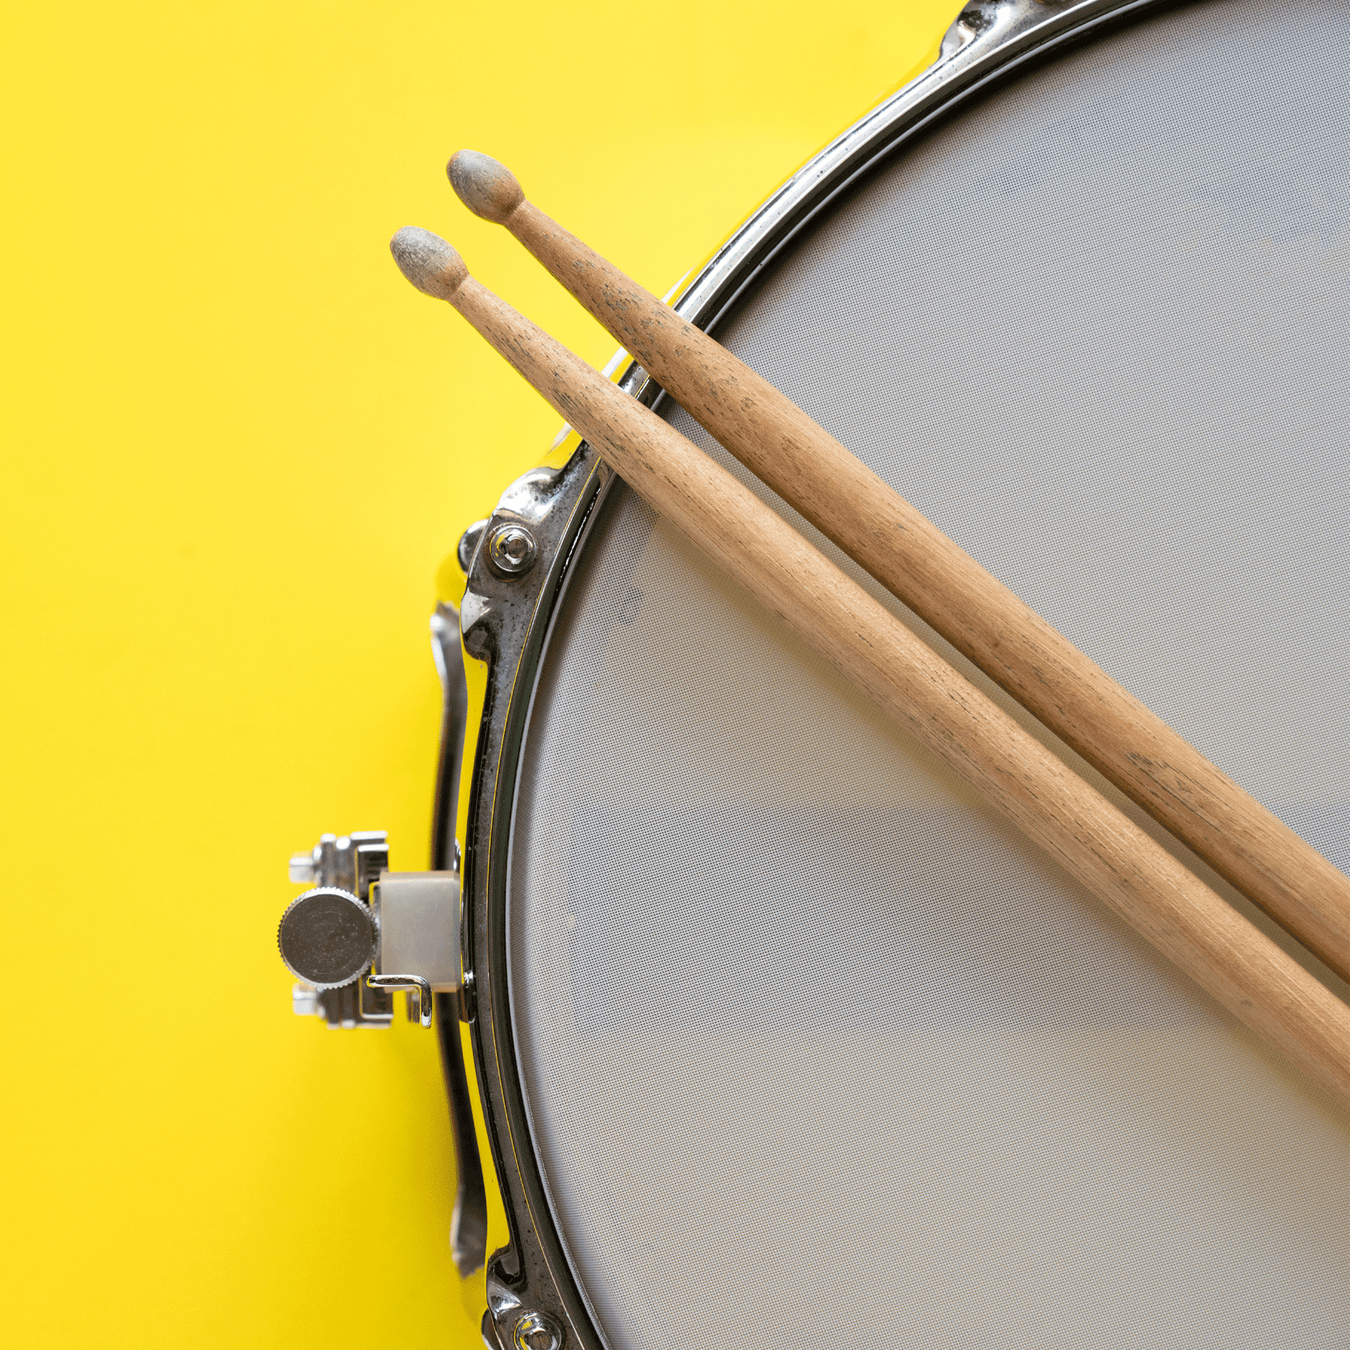 Drum Stick on snare